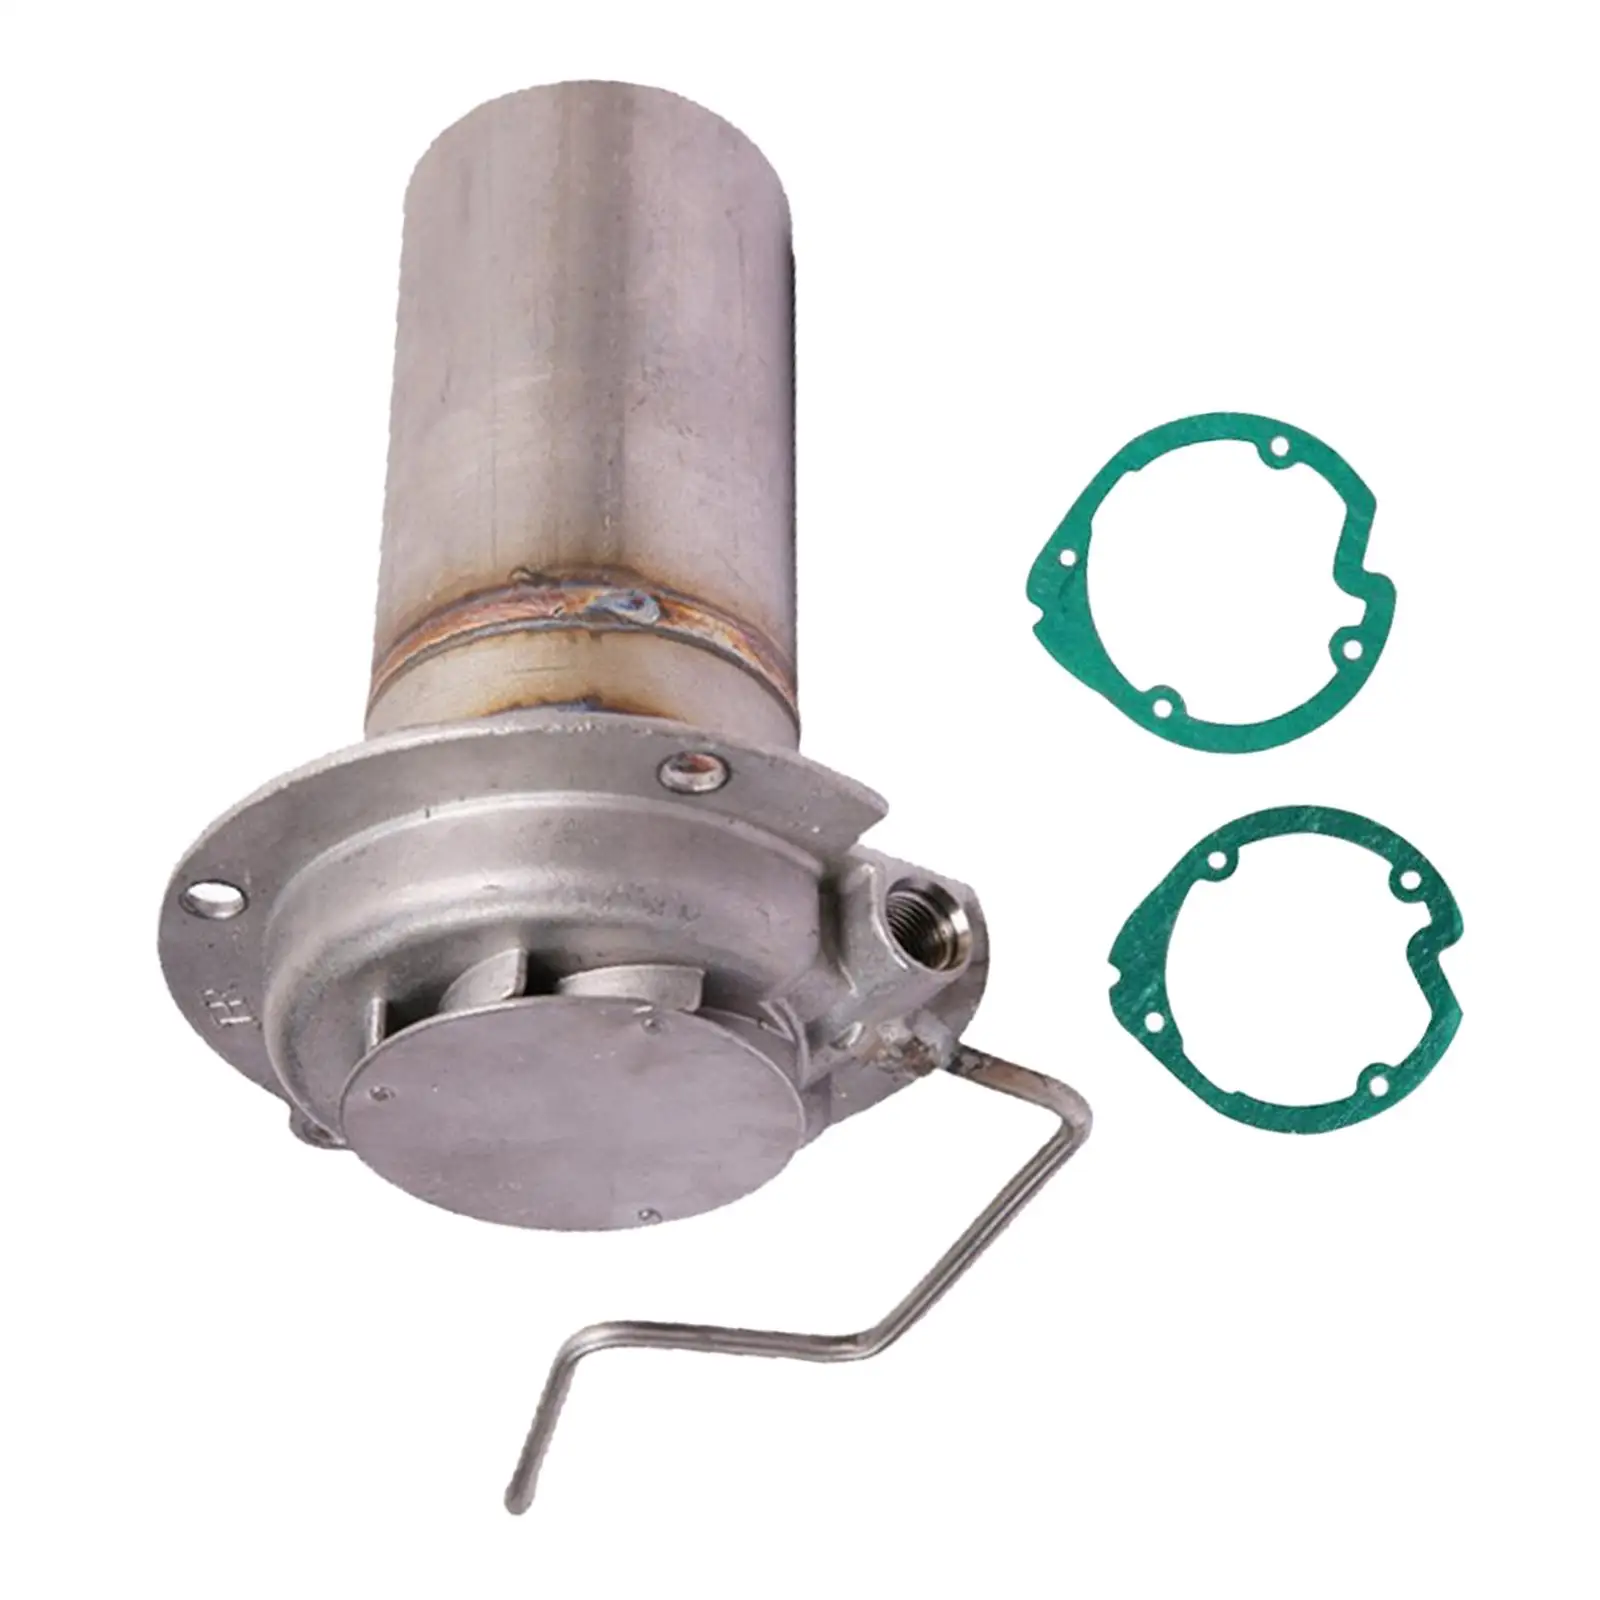 Vehicle Combustion Chamber Stainless Steel Replaces for Parking Heater